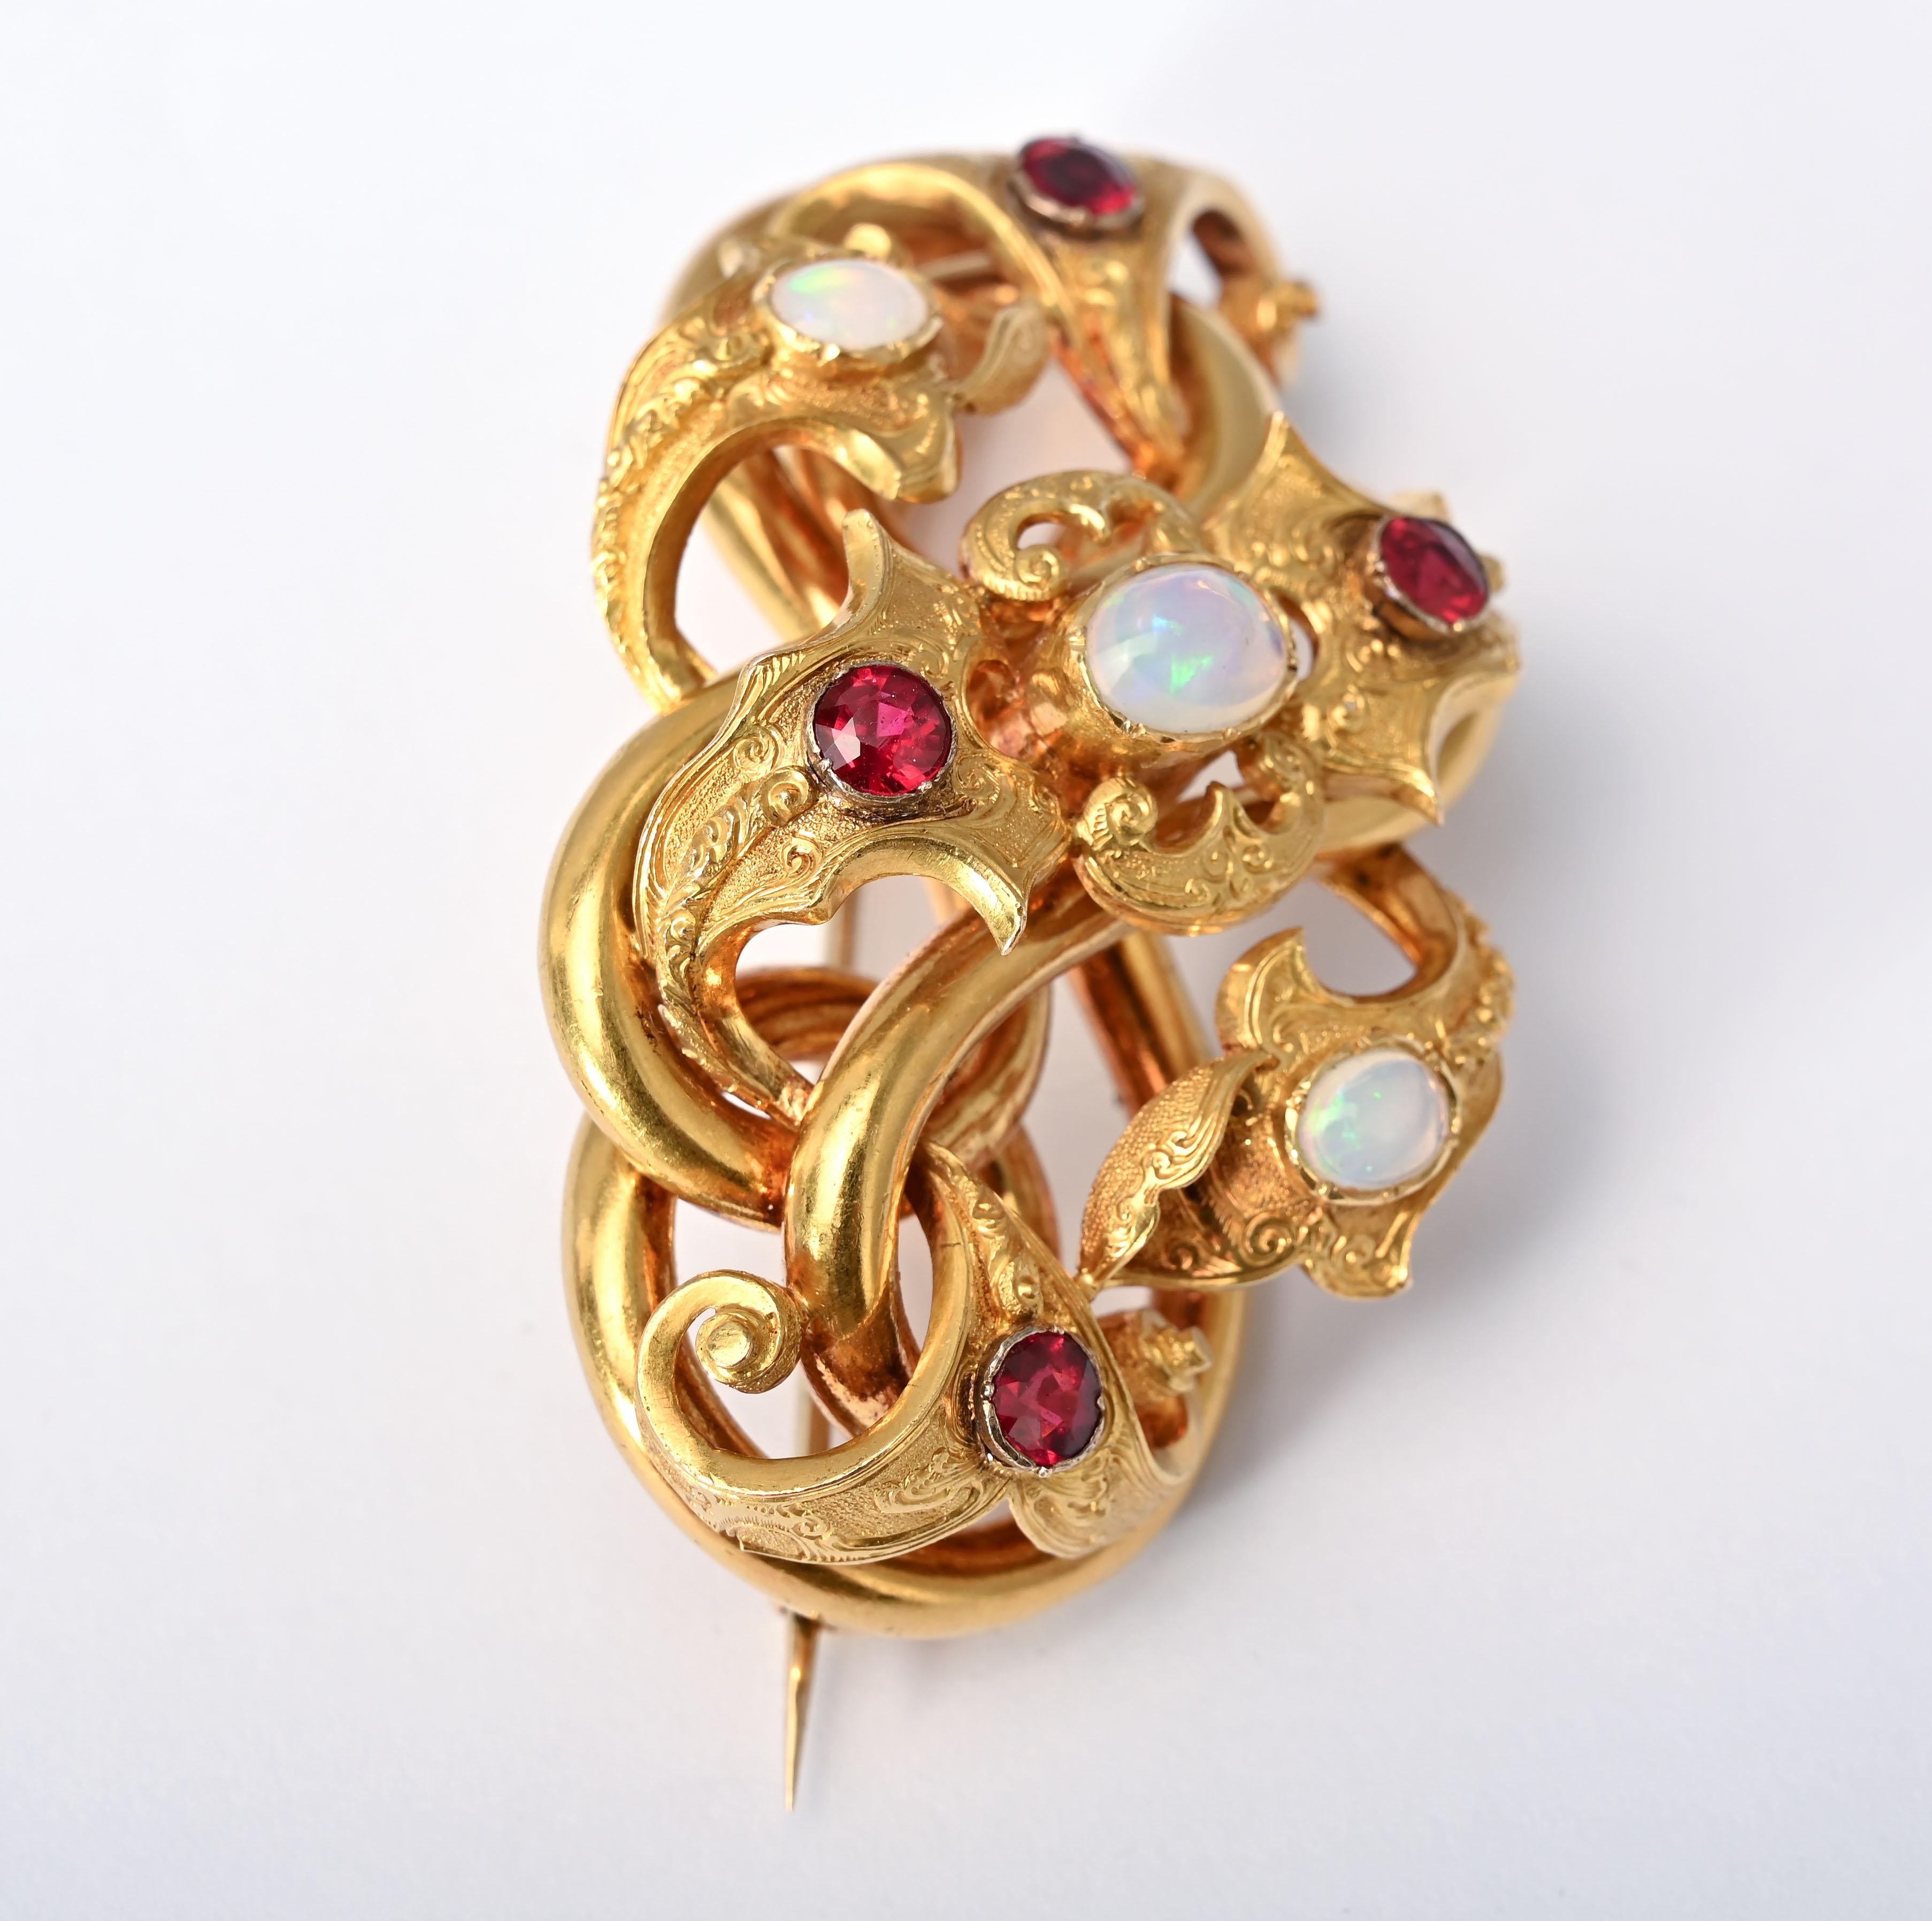 Elegant and unusual gold brooch with  a twisting in and out tubular design. The  brooch has three opals and four garnets mounted on different levels. The brooch is 2 3/8 inches w ide and 1 1/2  inches tall. It is 1 inch from the pinstem  to the top